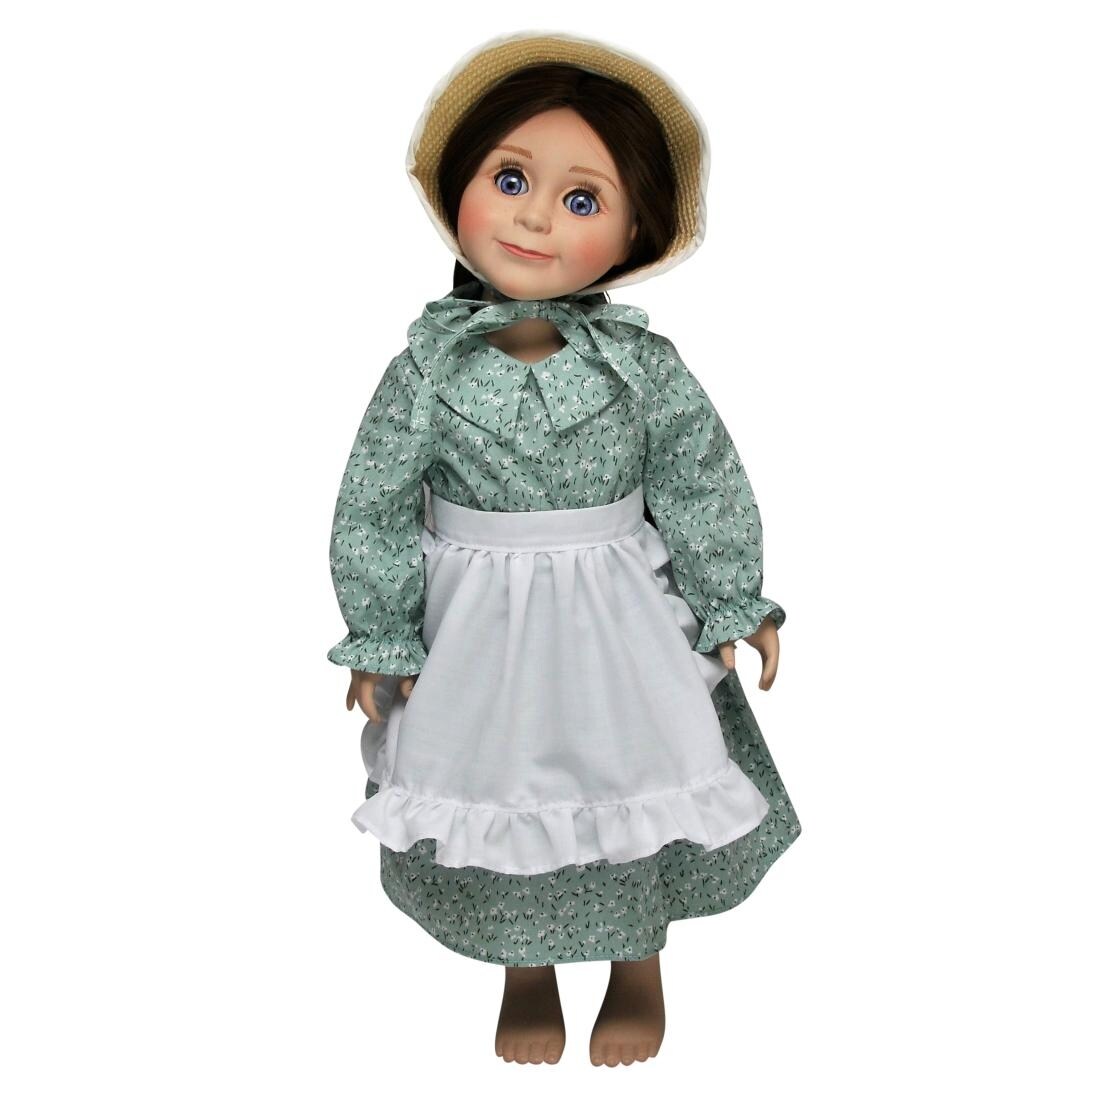 dolls comparable to american girl